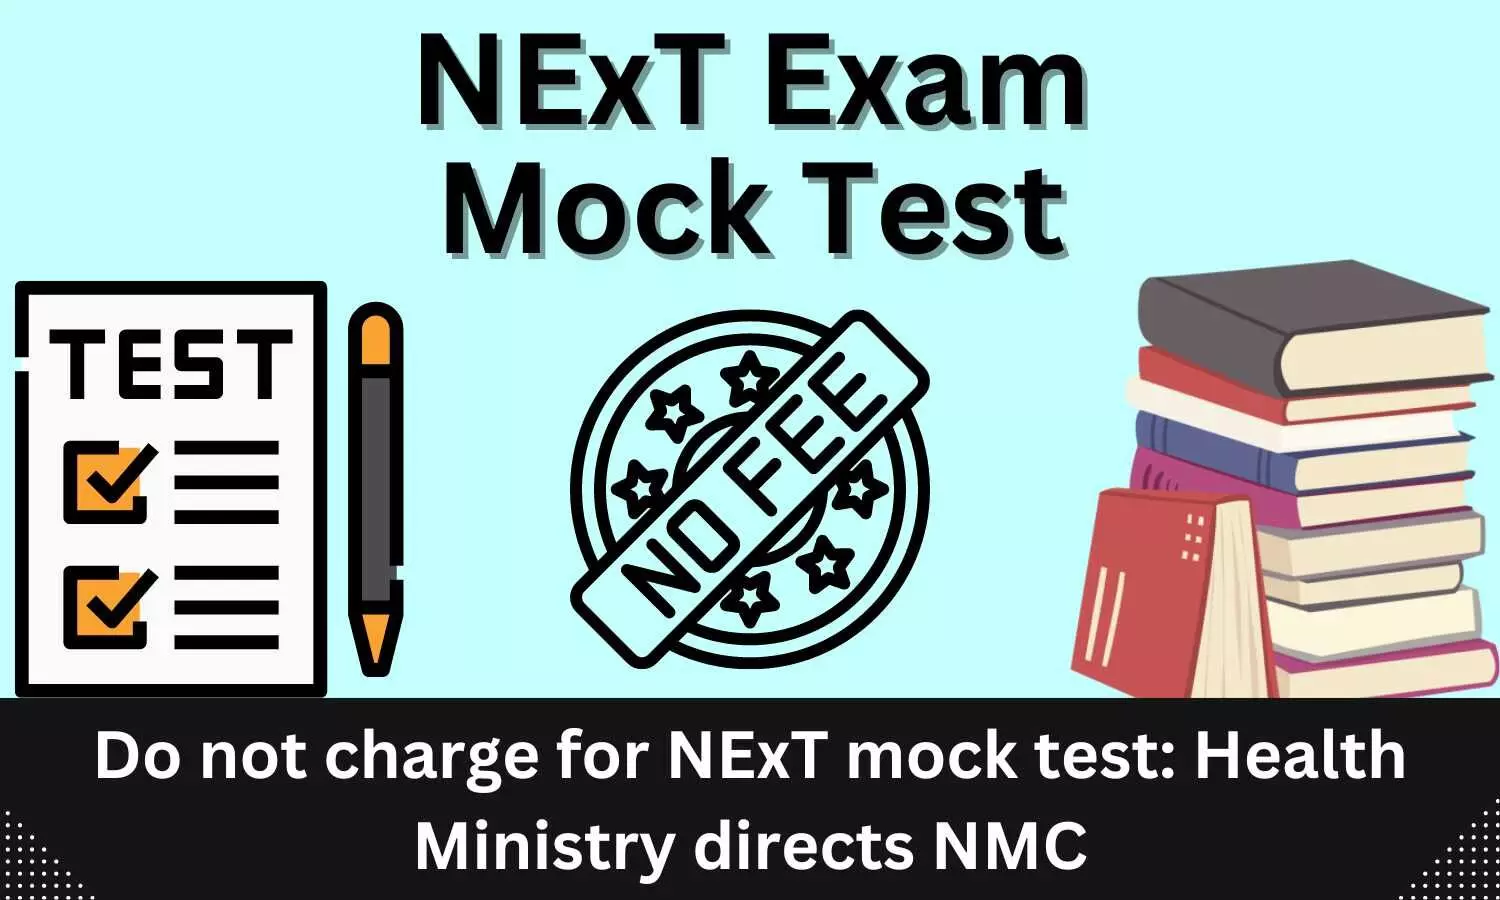 Waive off NExT mock test fee: Health Ministry asks NMC